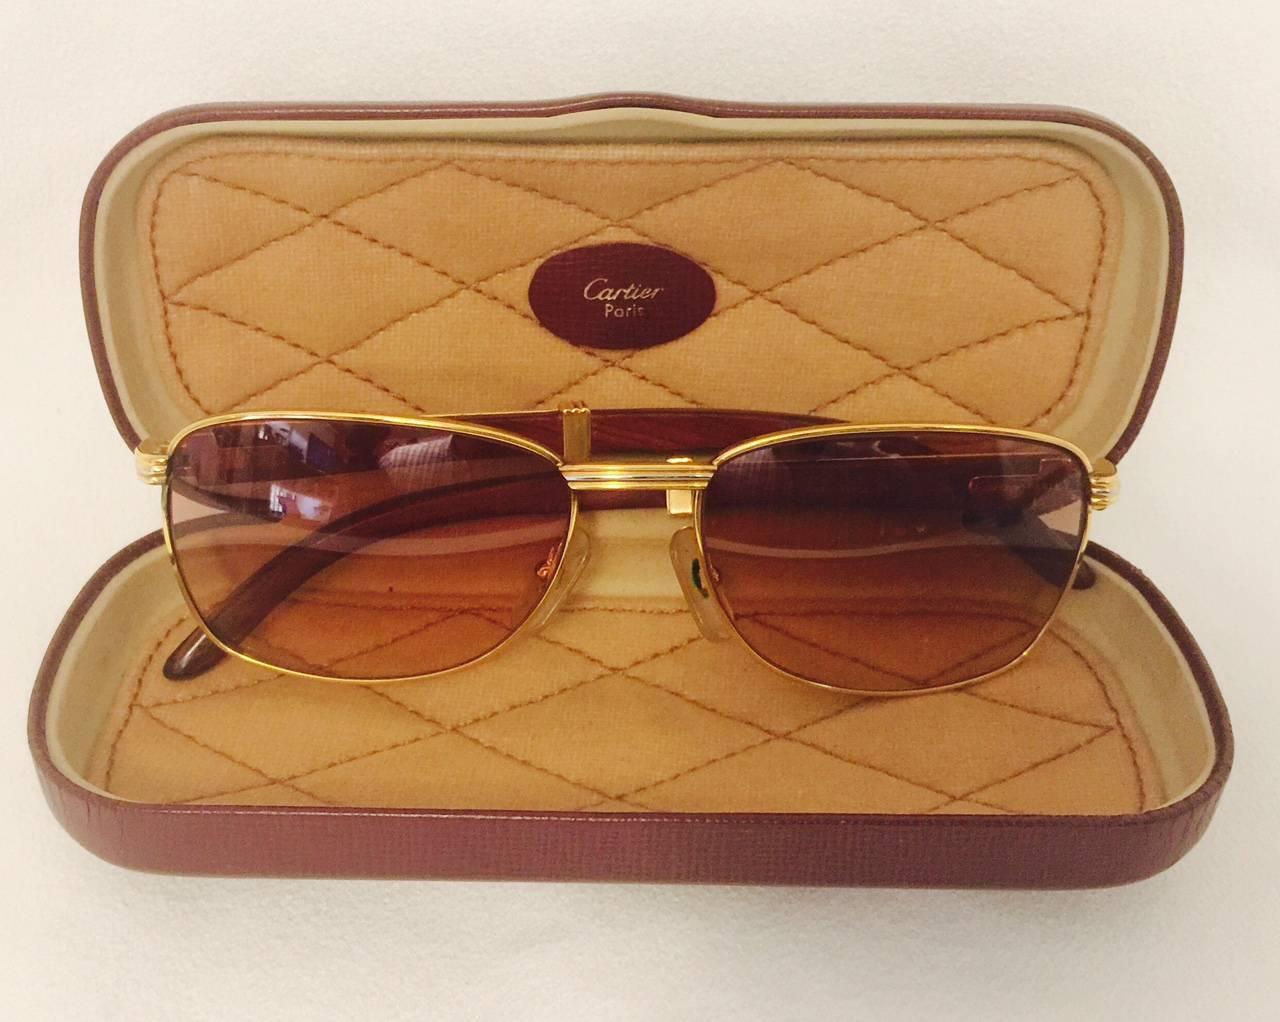 Cartier Monceau vintage sunglasses feature 18K yellow and white gold and exquisite wood and gold temples.  Outstanding only begins to describe the artistry and craftsmanship including the hallmarks - both arms sport the iconic Cartier logo. 